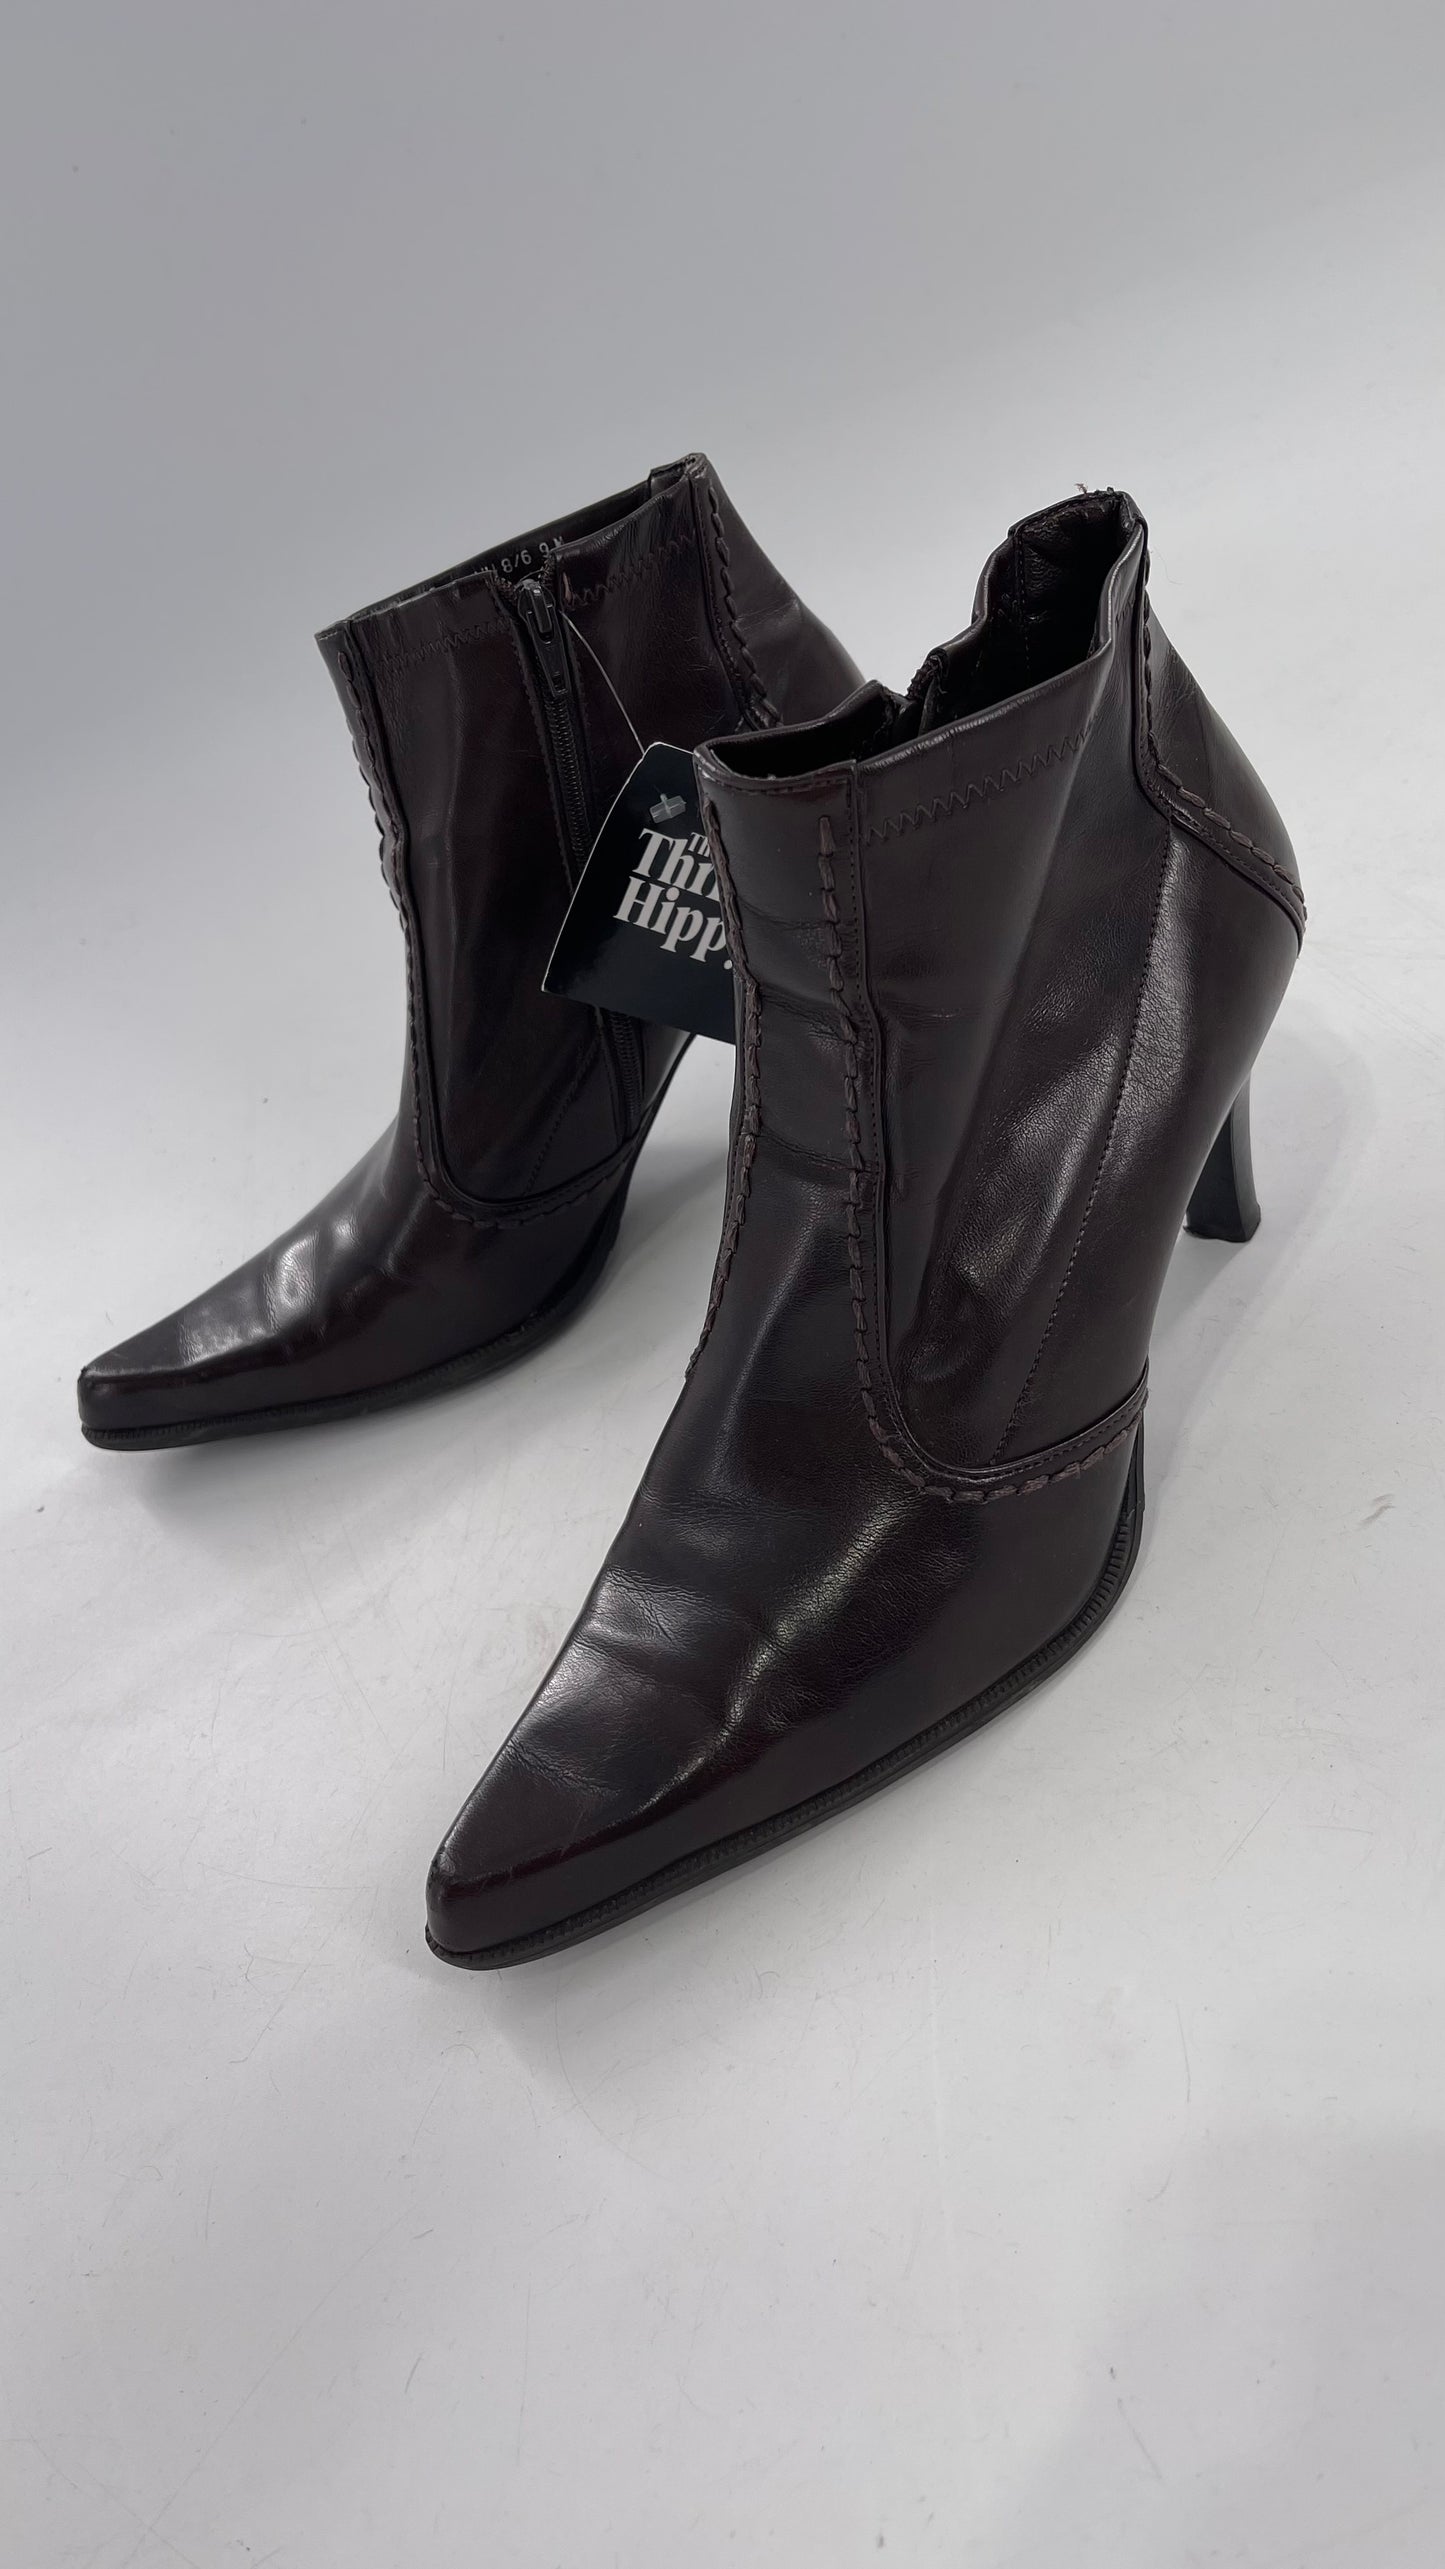 Vintage Franco Sarto Brown Leather Booties Hand Made in Brazil (9)